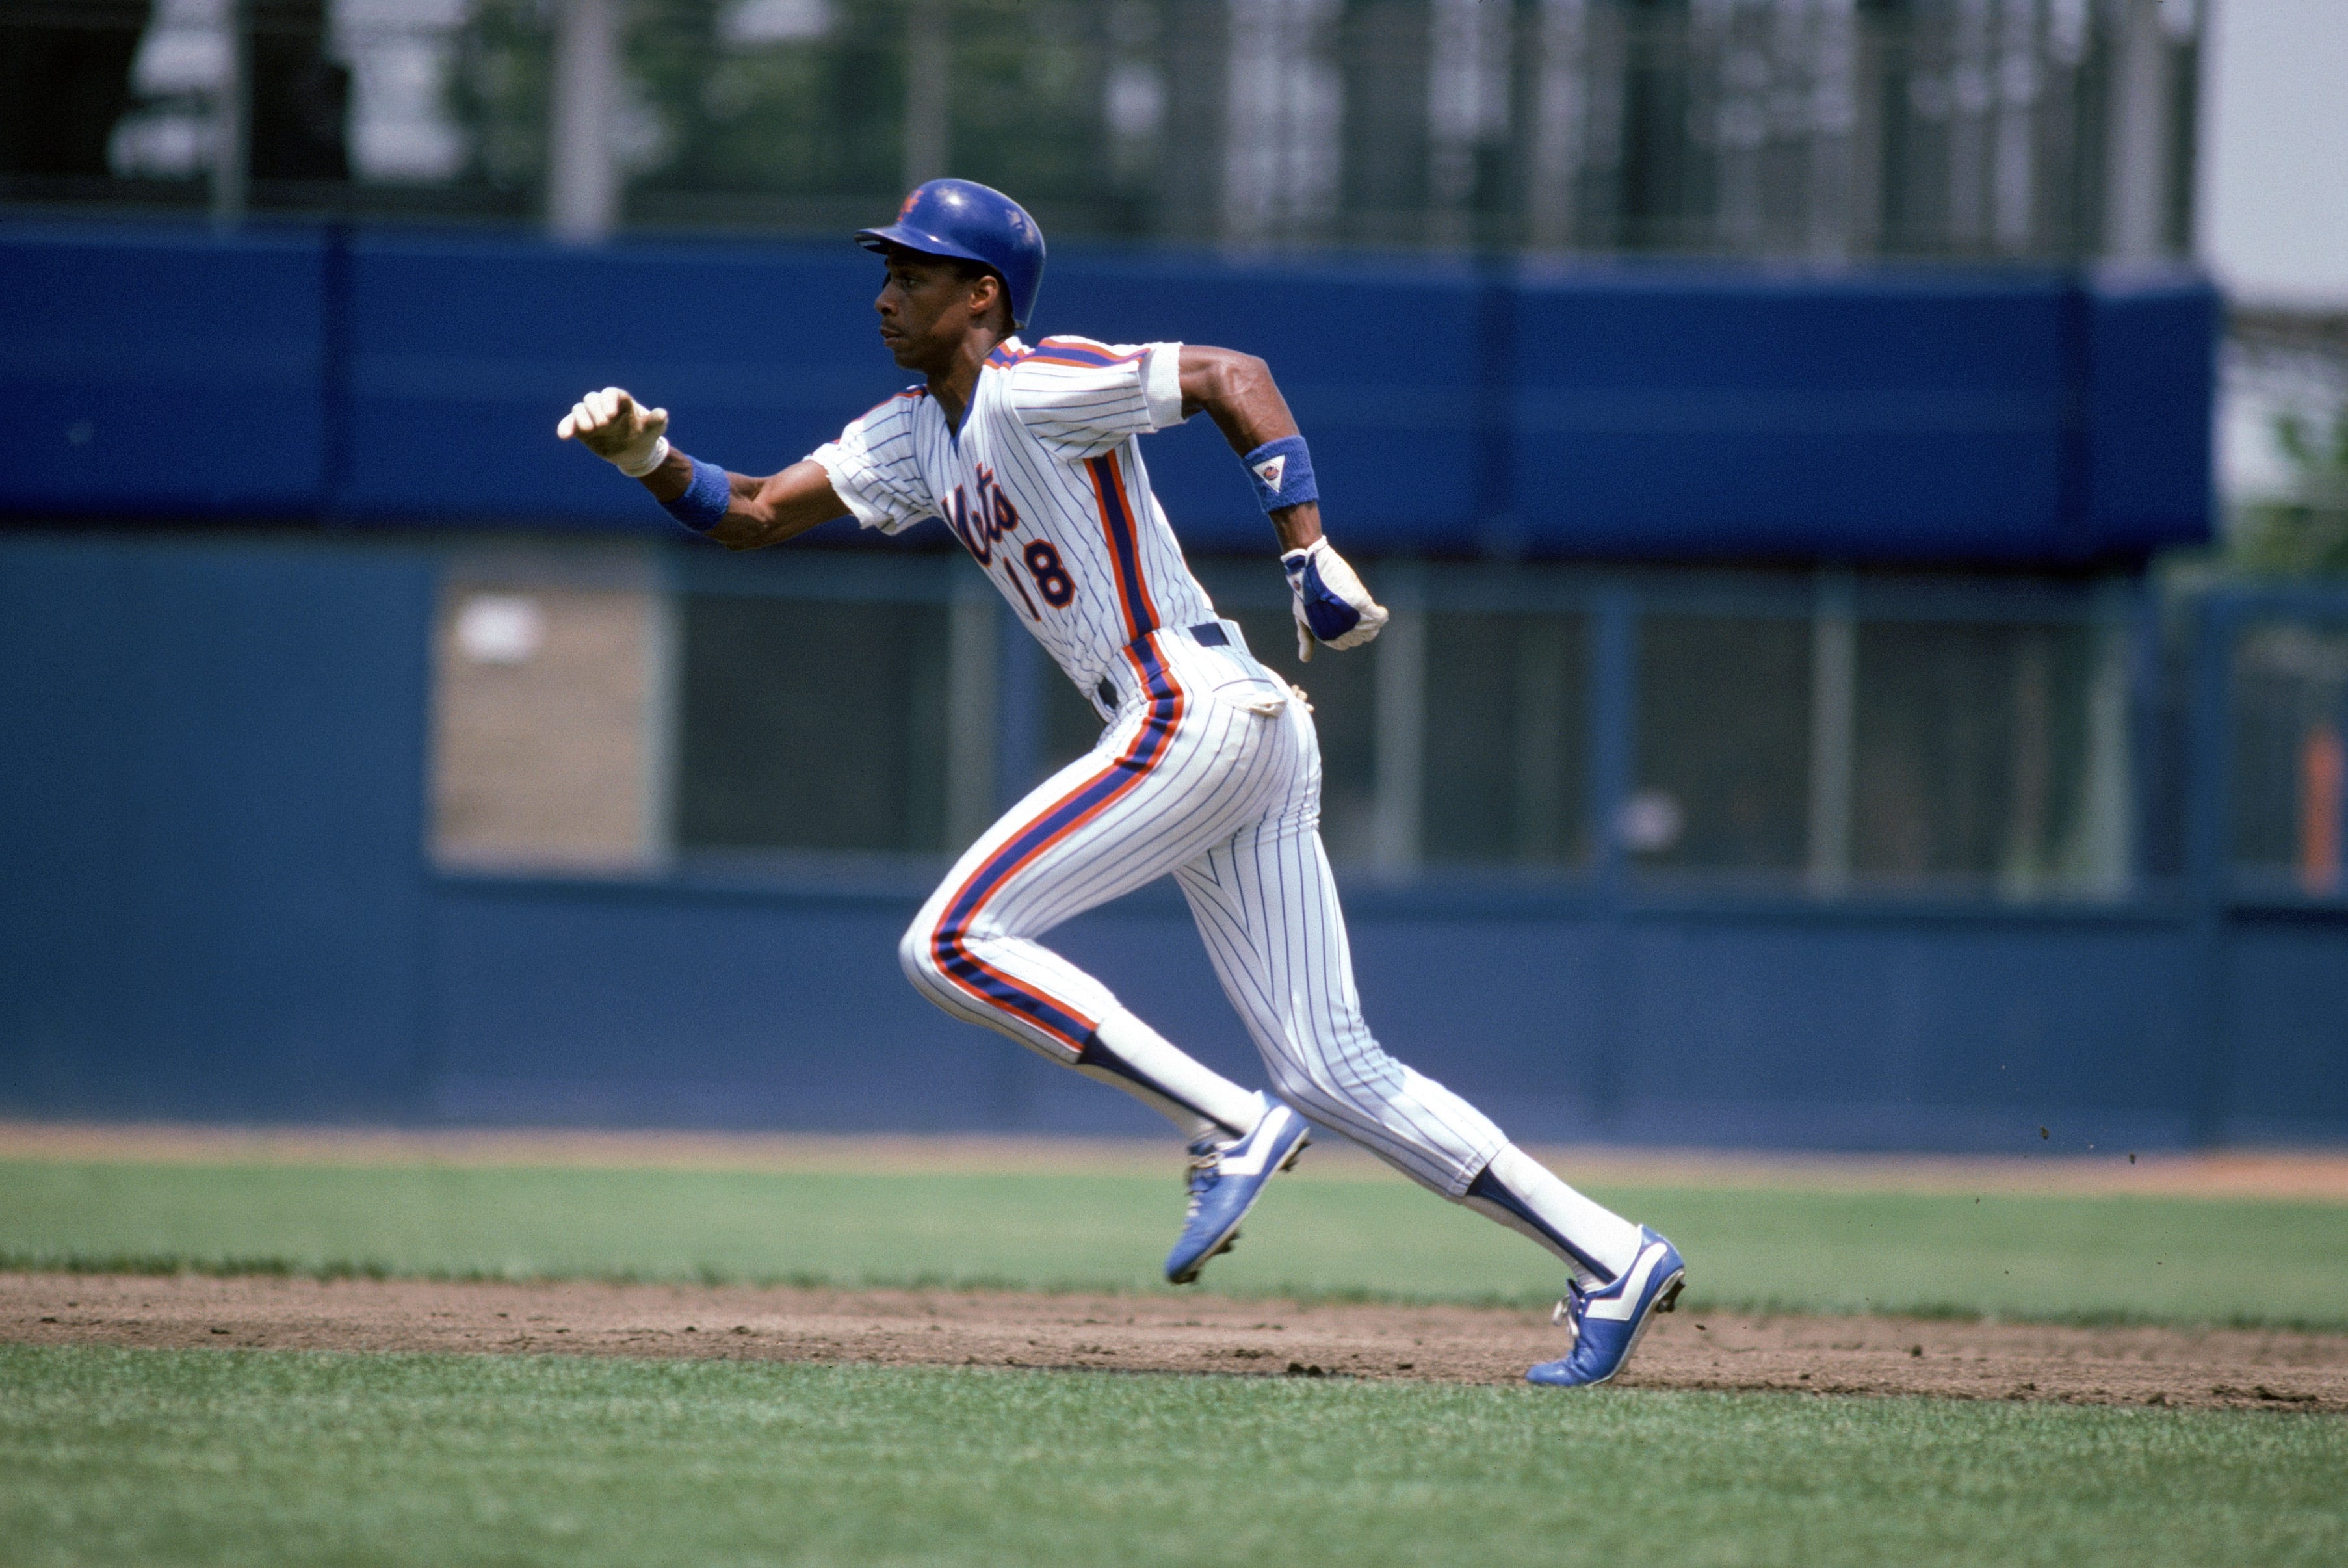 Darryl Strawberry, Doc Gooden to have numbers retired by Mets next season